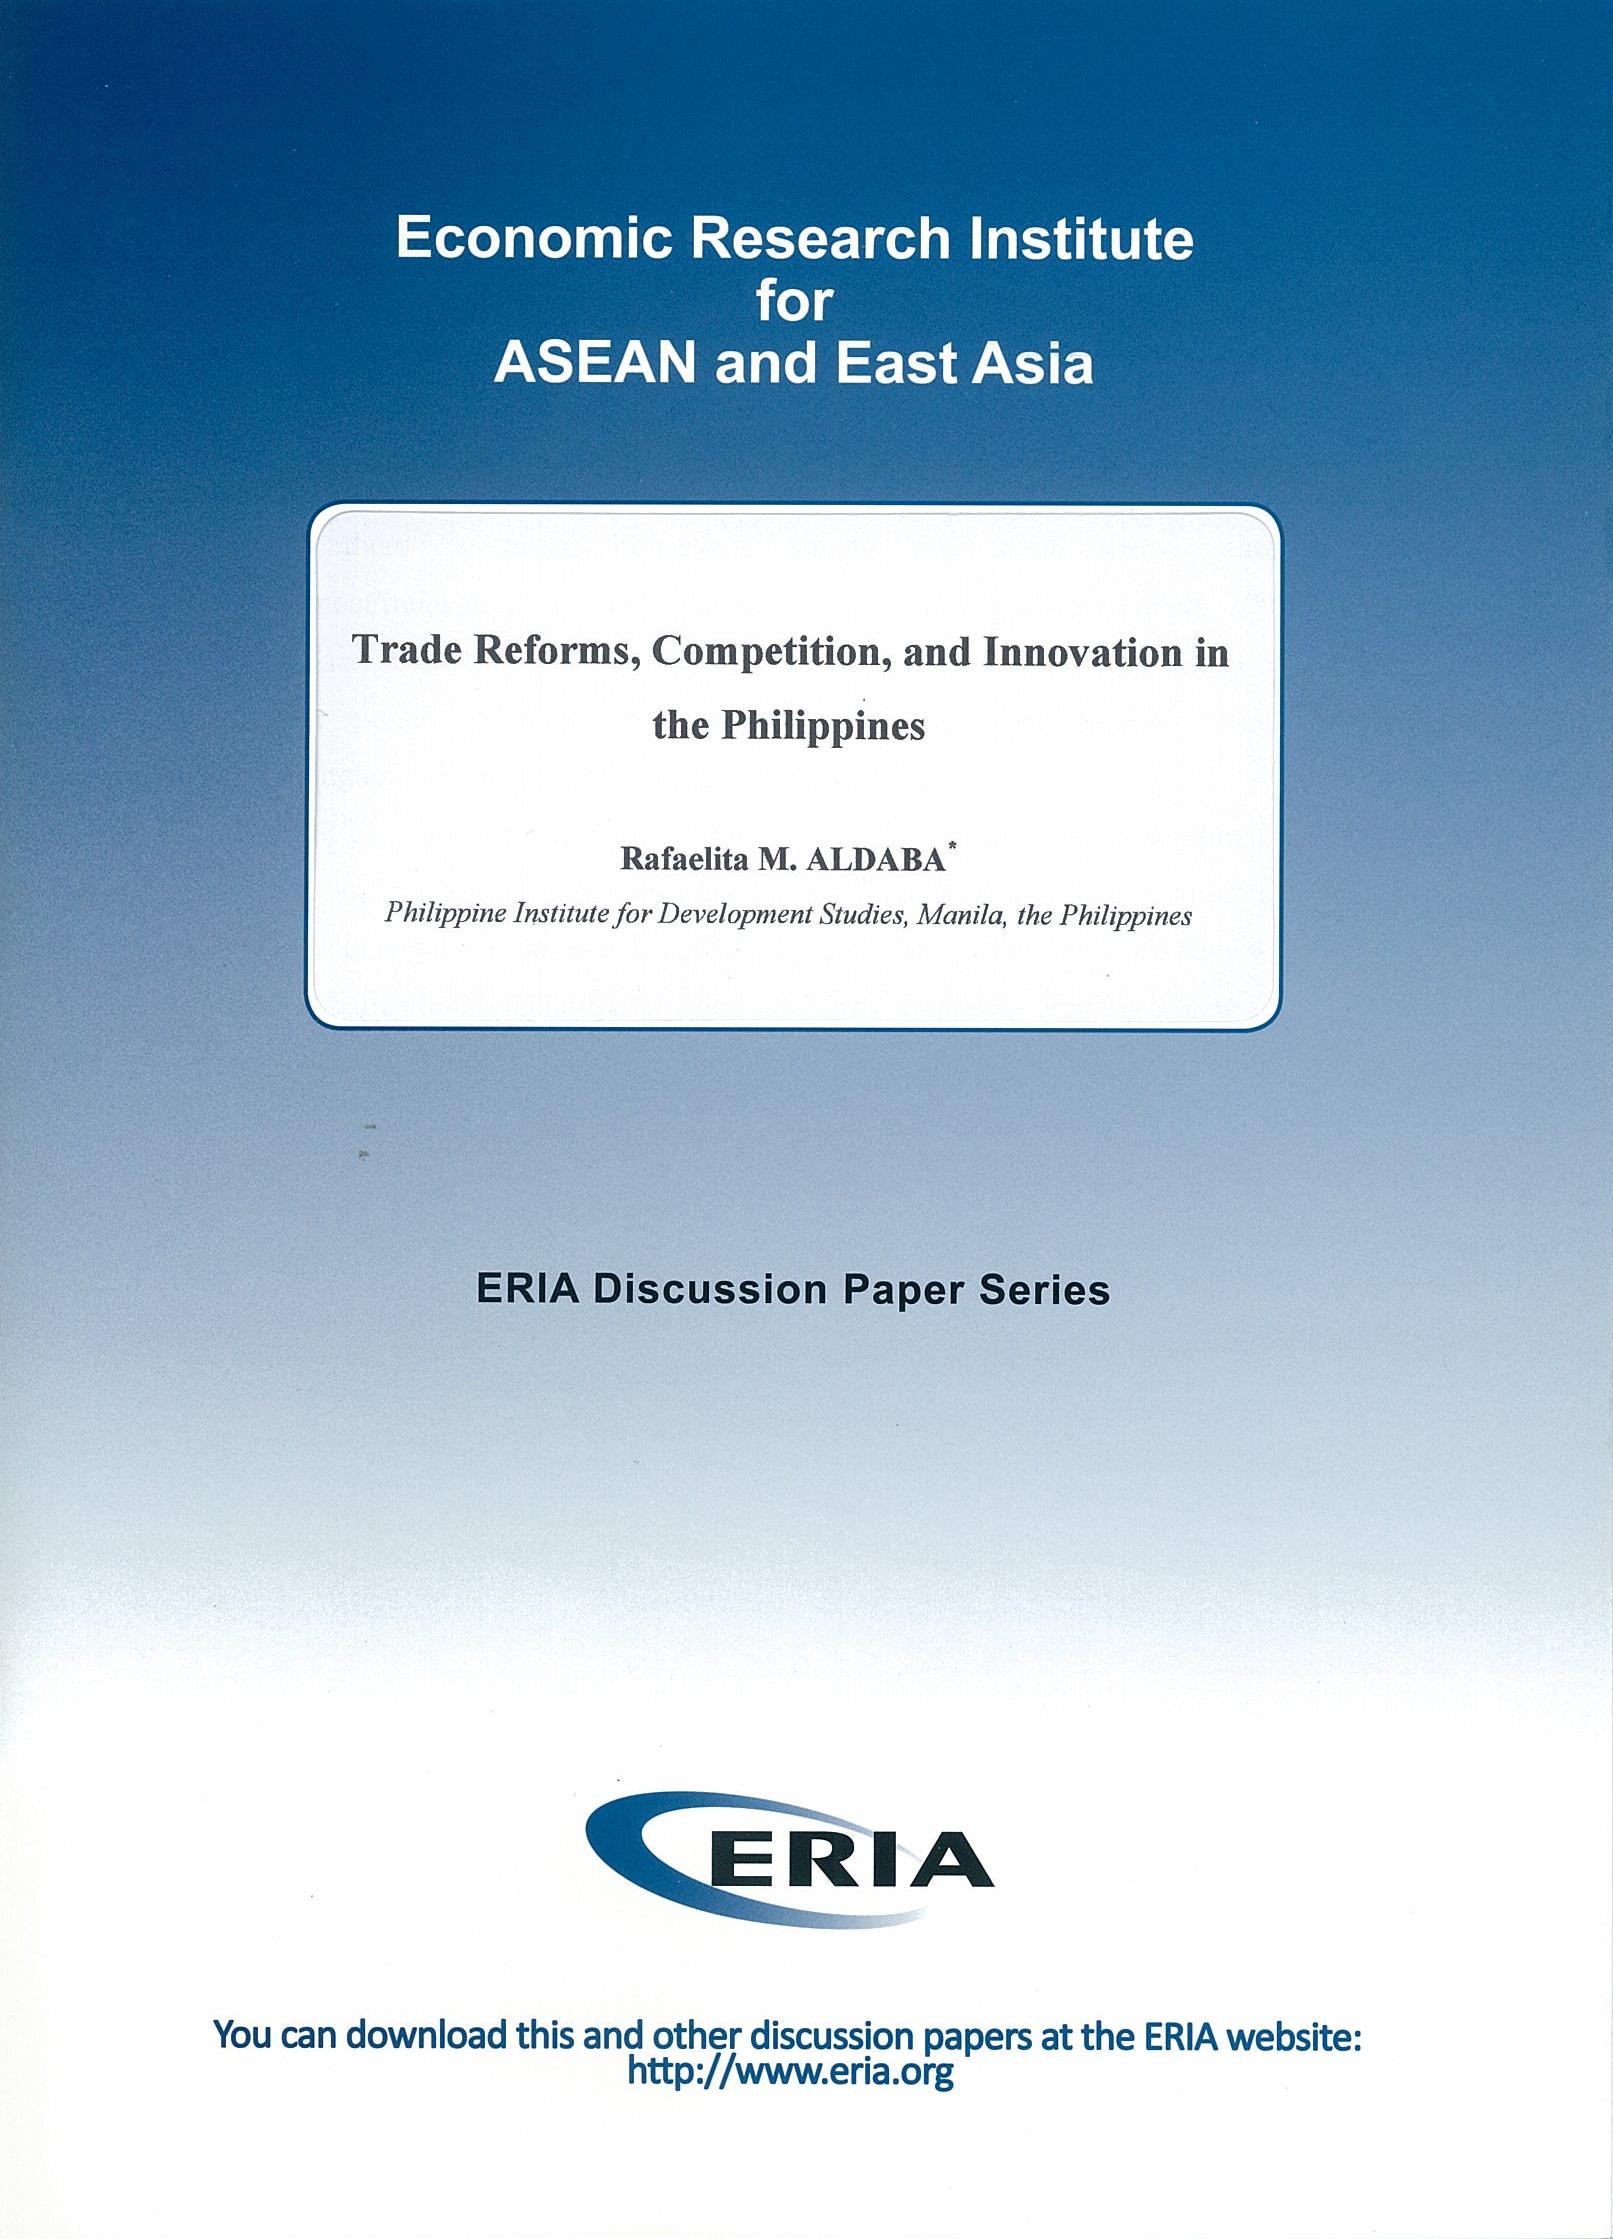 Trade Reforms, Competition, and Innovation in the Philippines